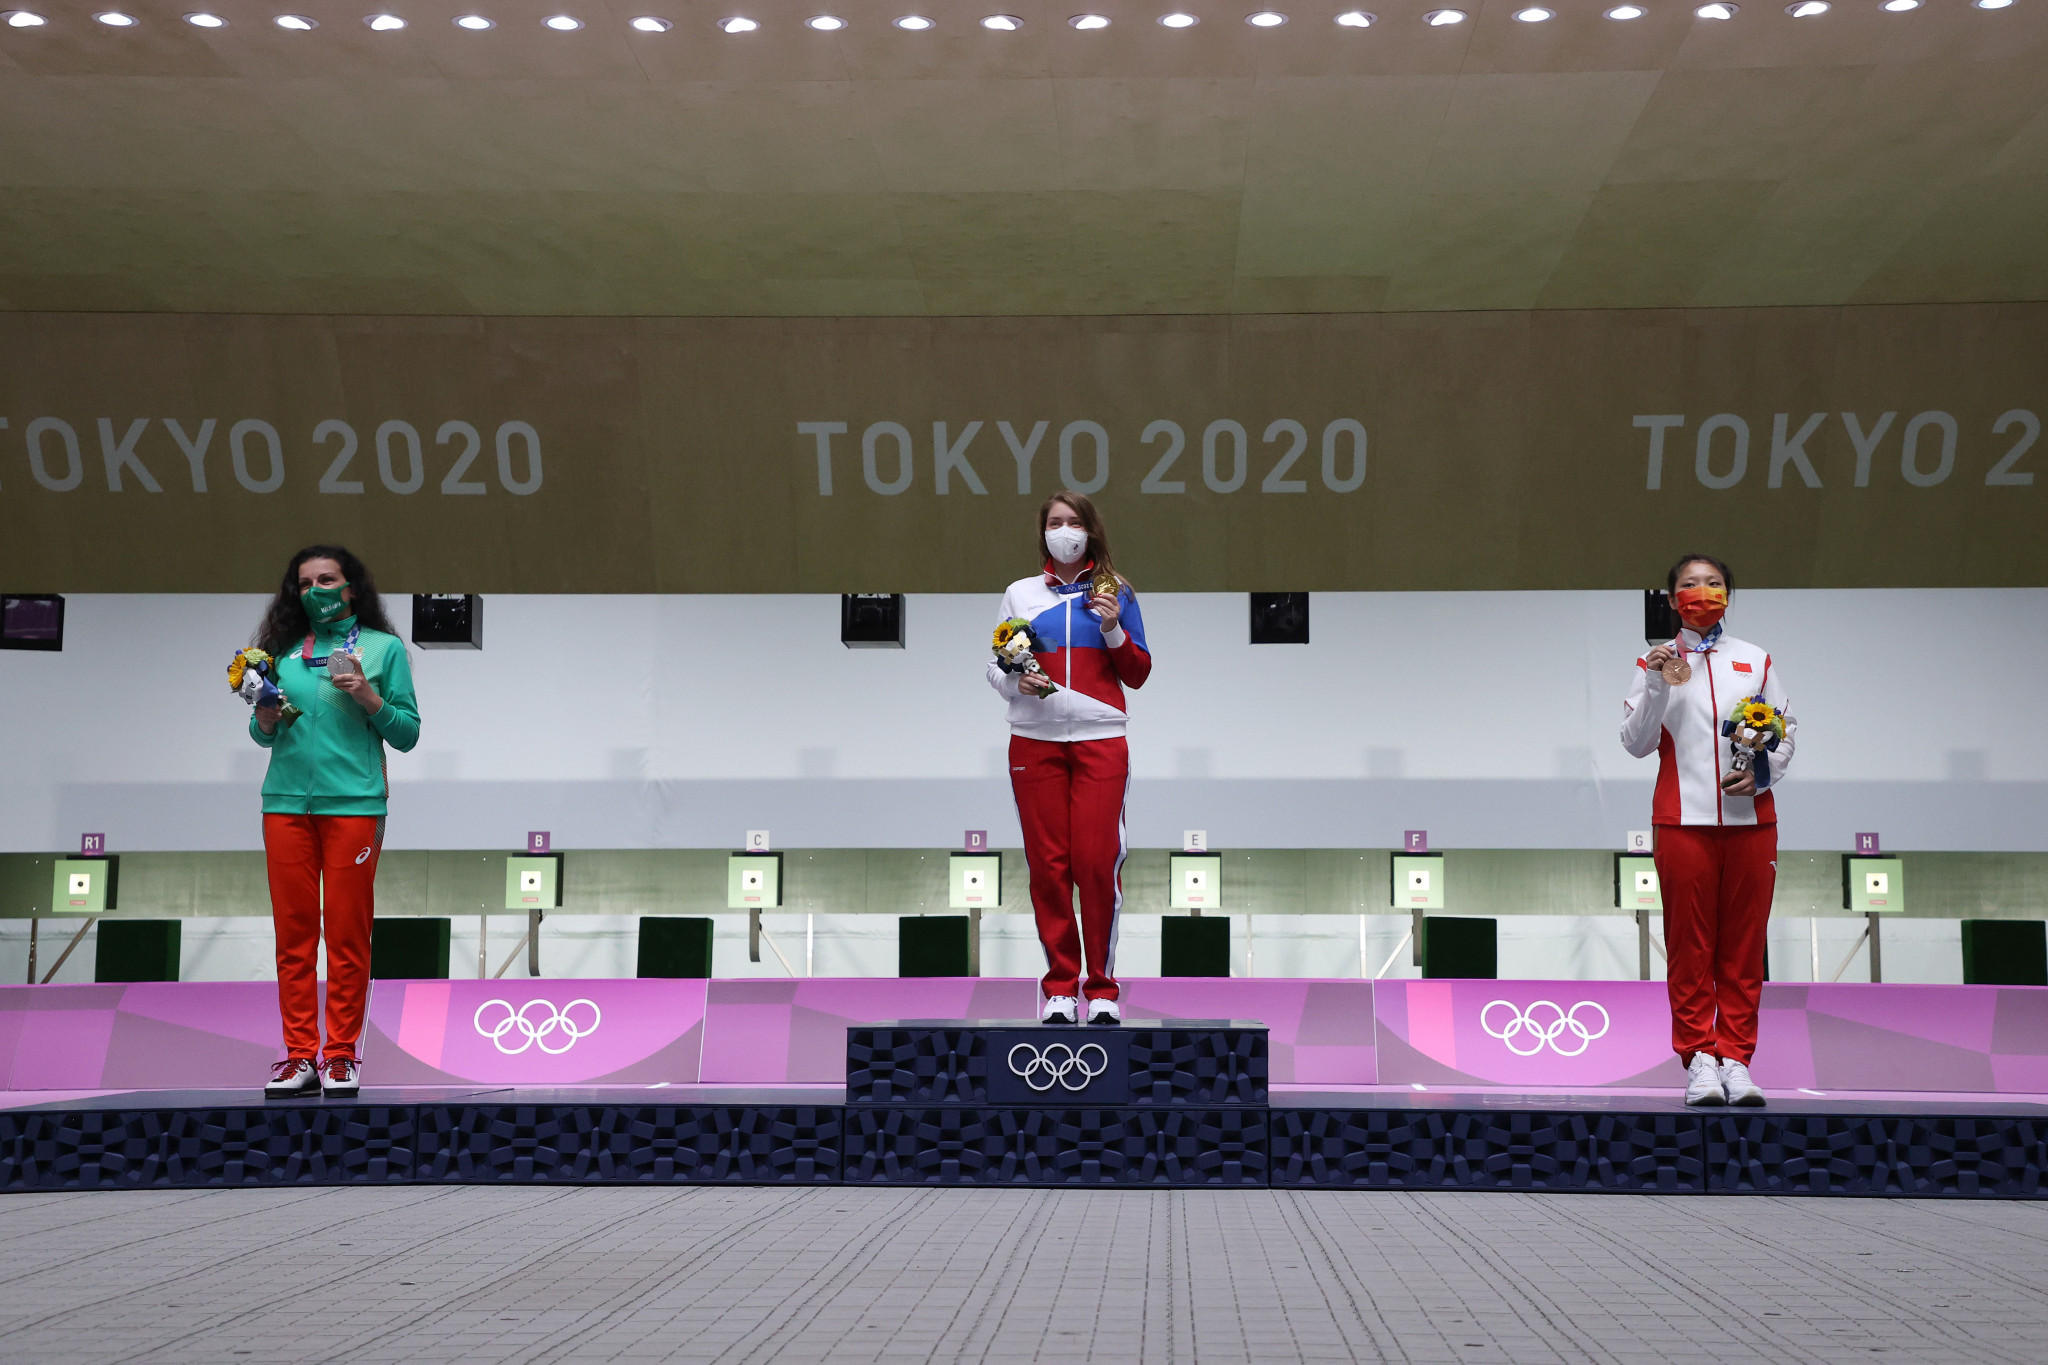 Tribute was paid to Vitalina Batsarashkina's grandparents after her victory in the women's 10 metres air pistol at Tokyo 2020 ©Getty Images